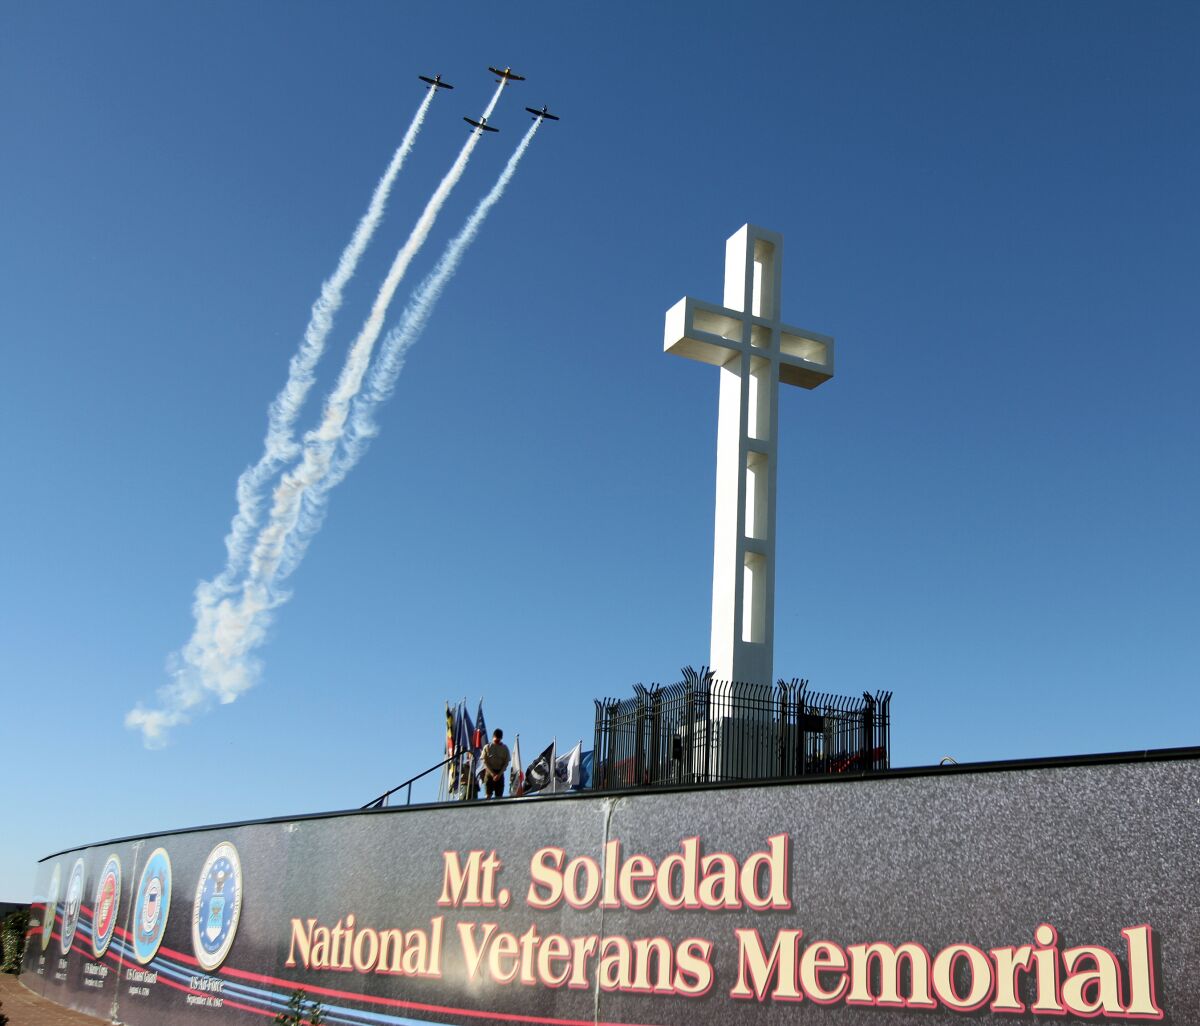 The Mount Soledad National Veterans Memorial in La Jolla will host a Memorial Day ceremony Monday, May 29.